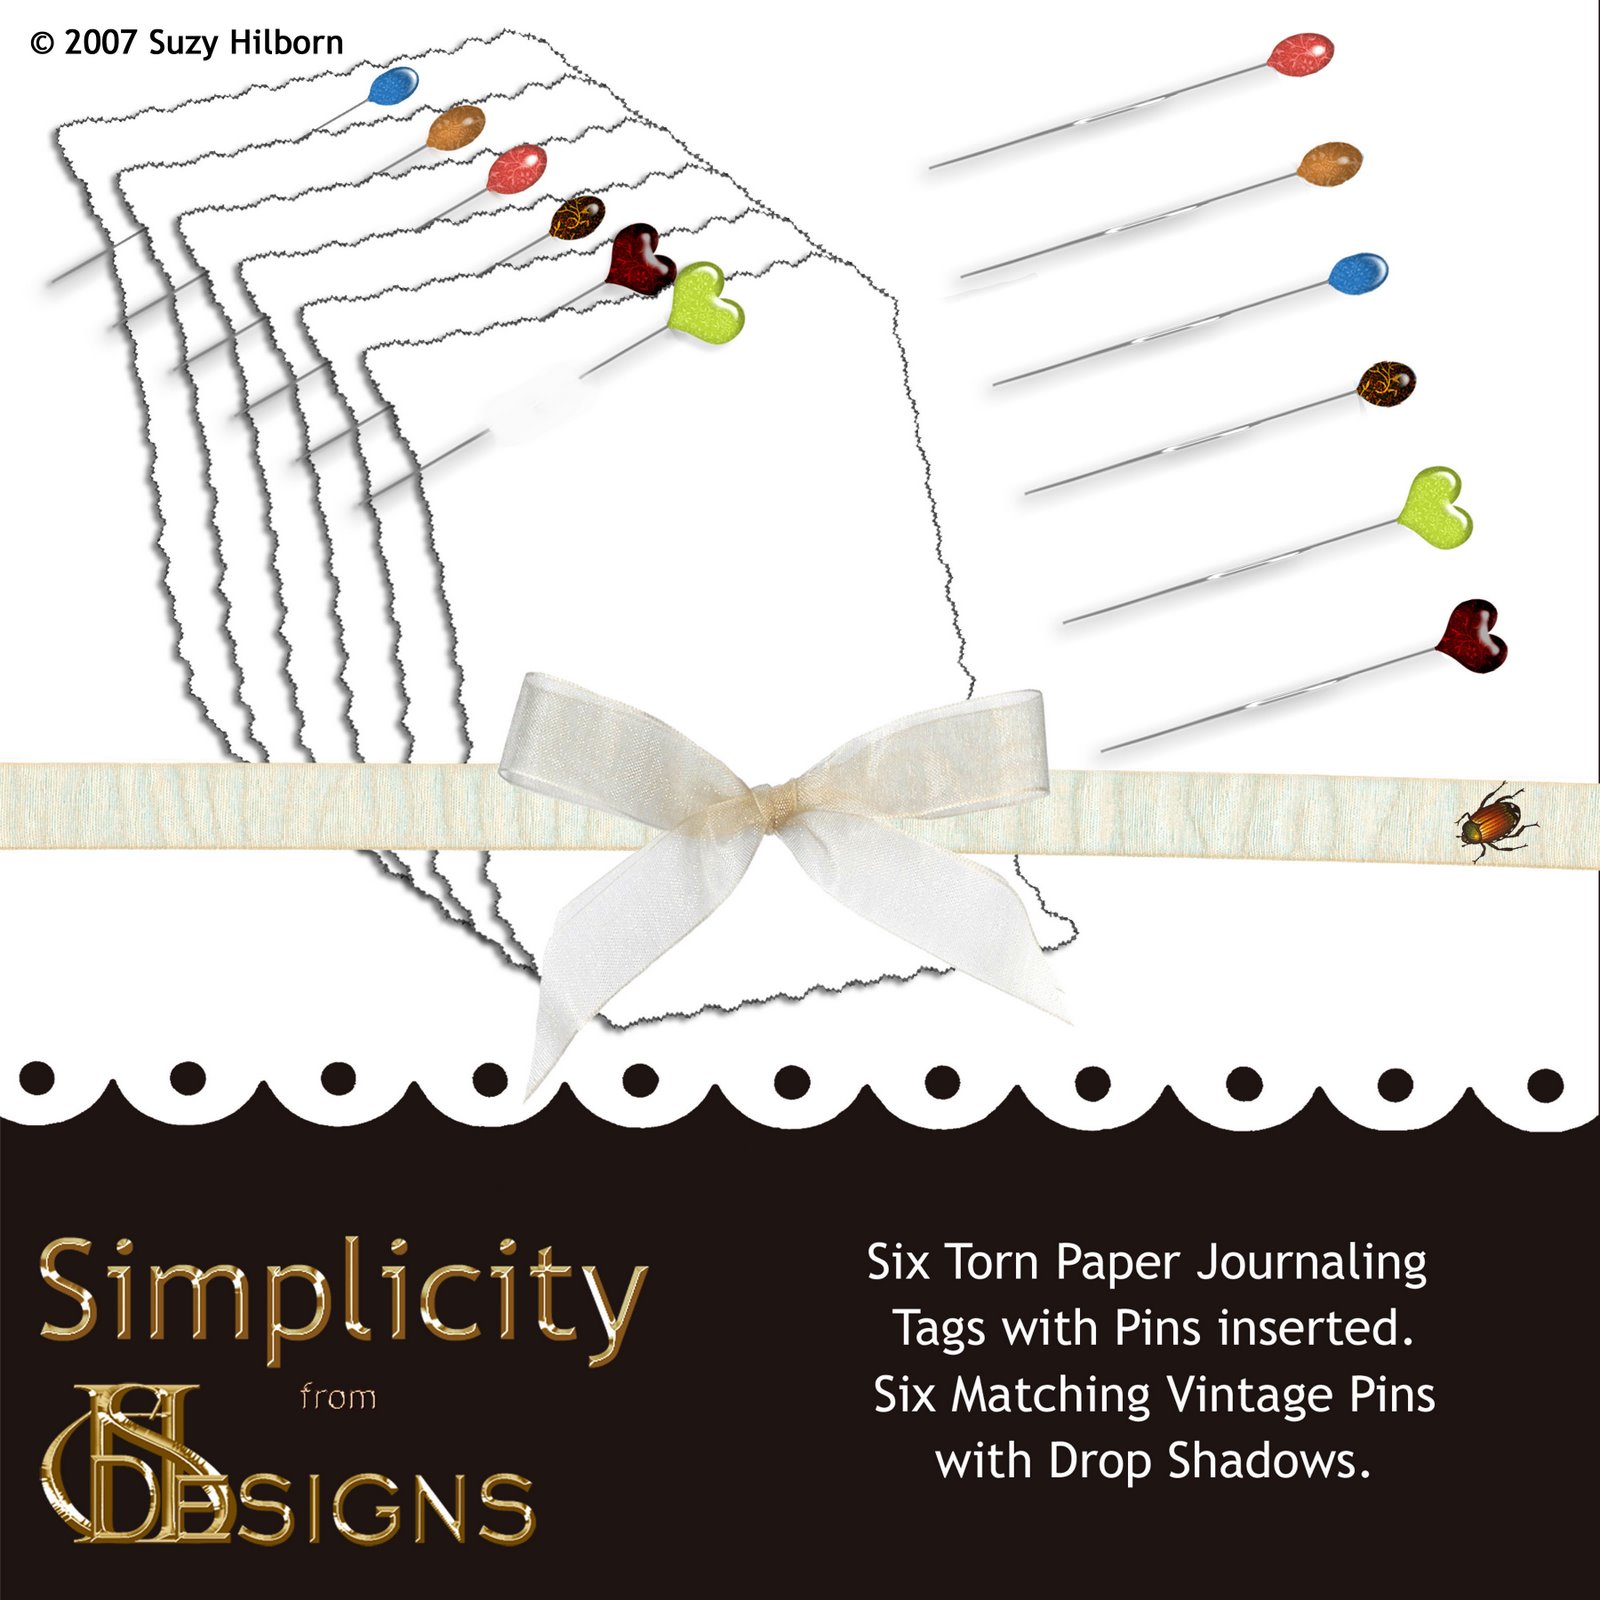 [SHI_Simplicity_Pinned_Journals_and_Pins_Product_Page.jpg]